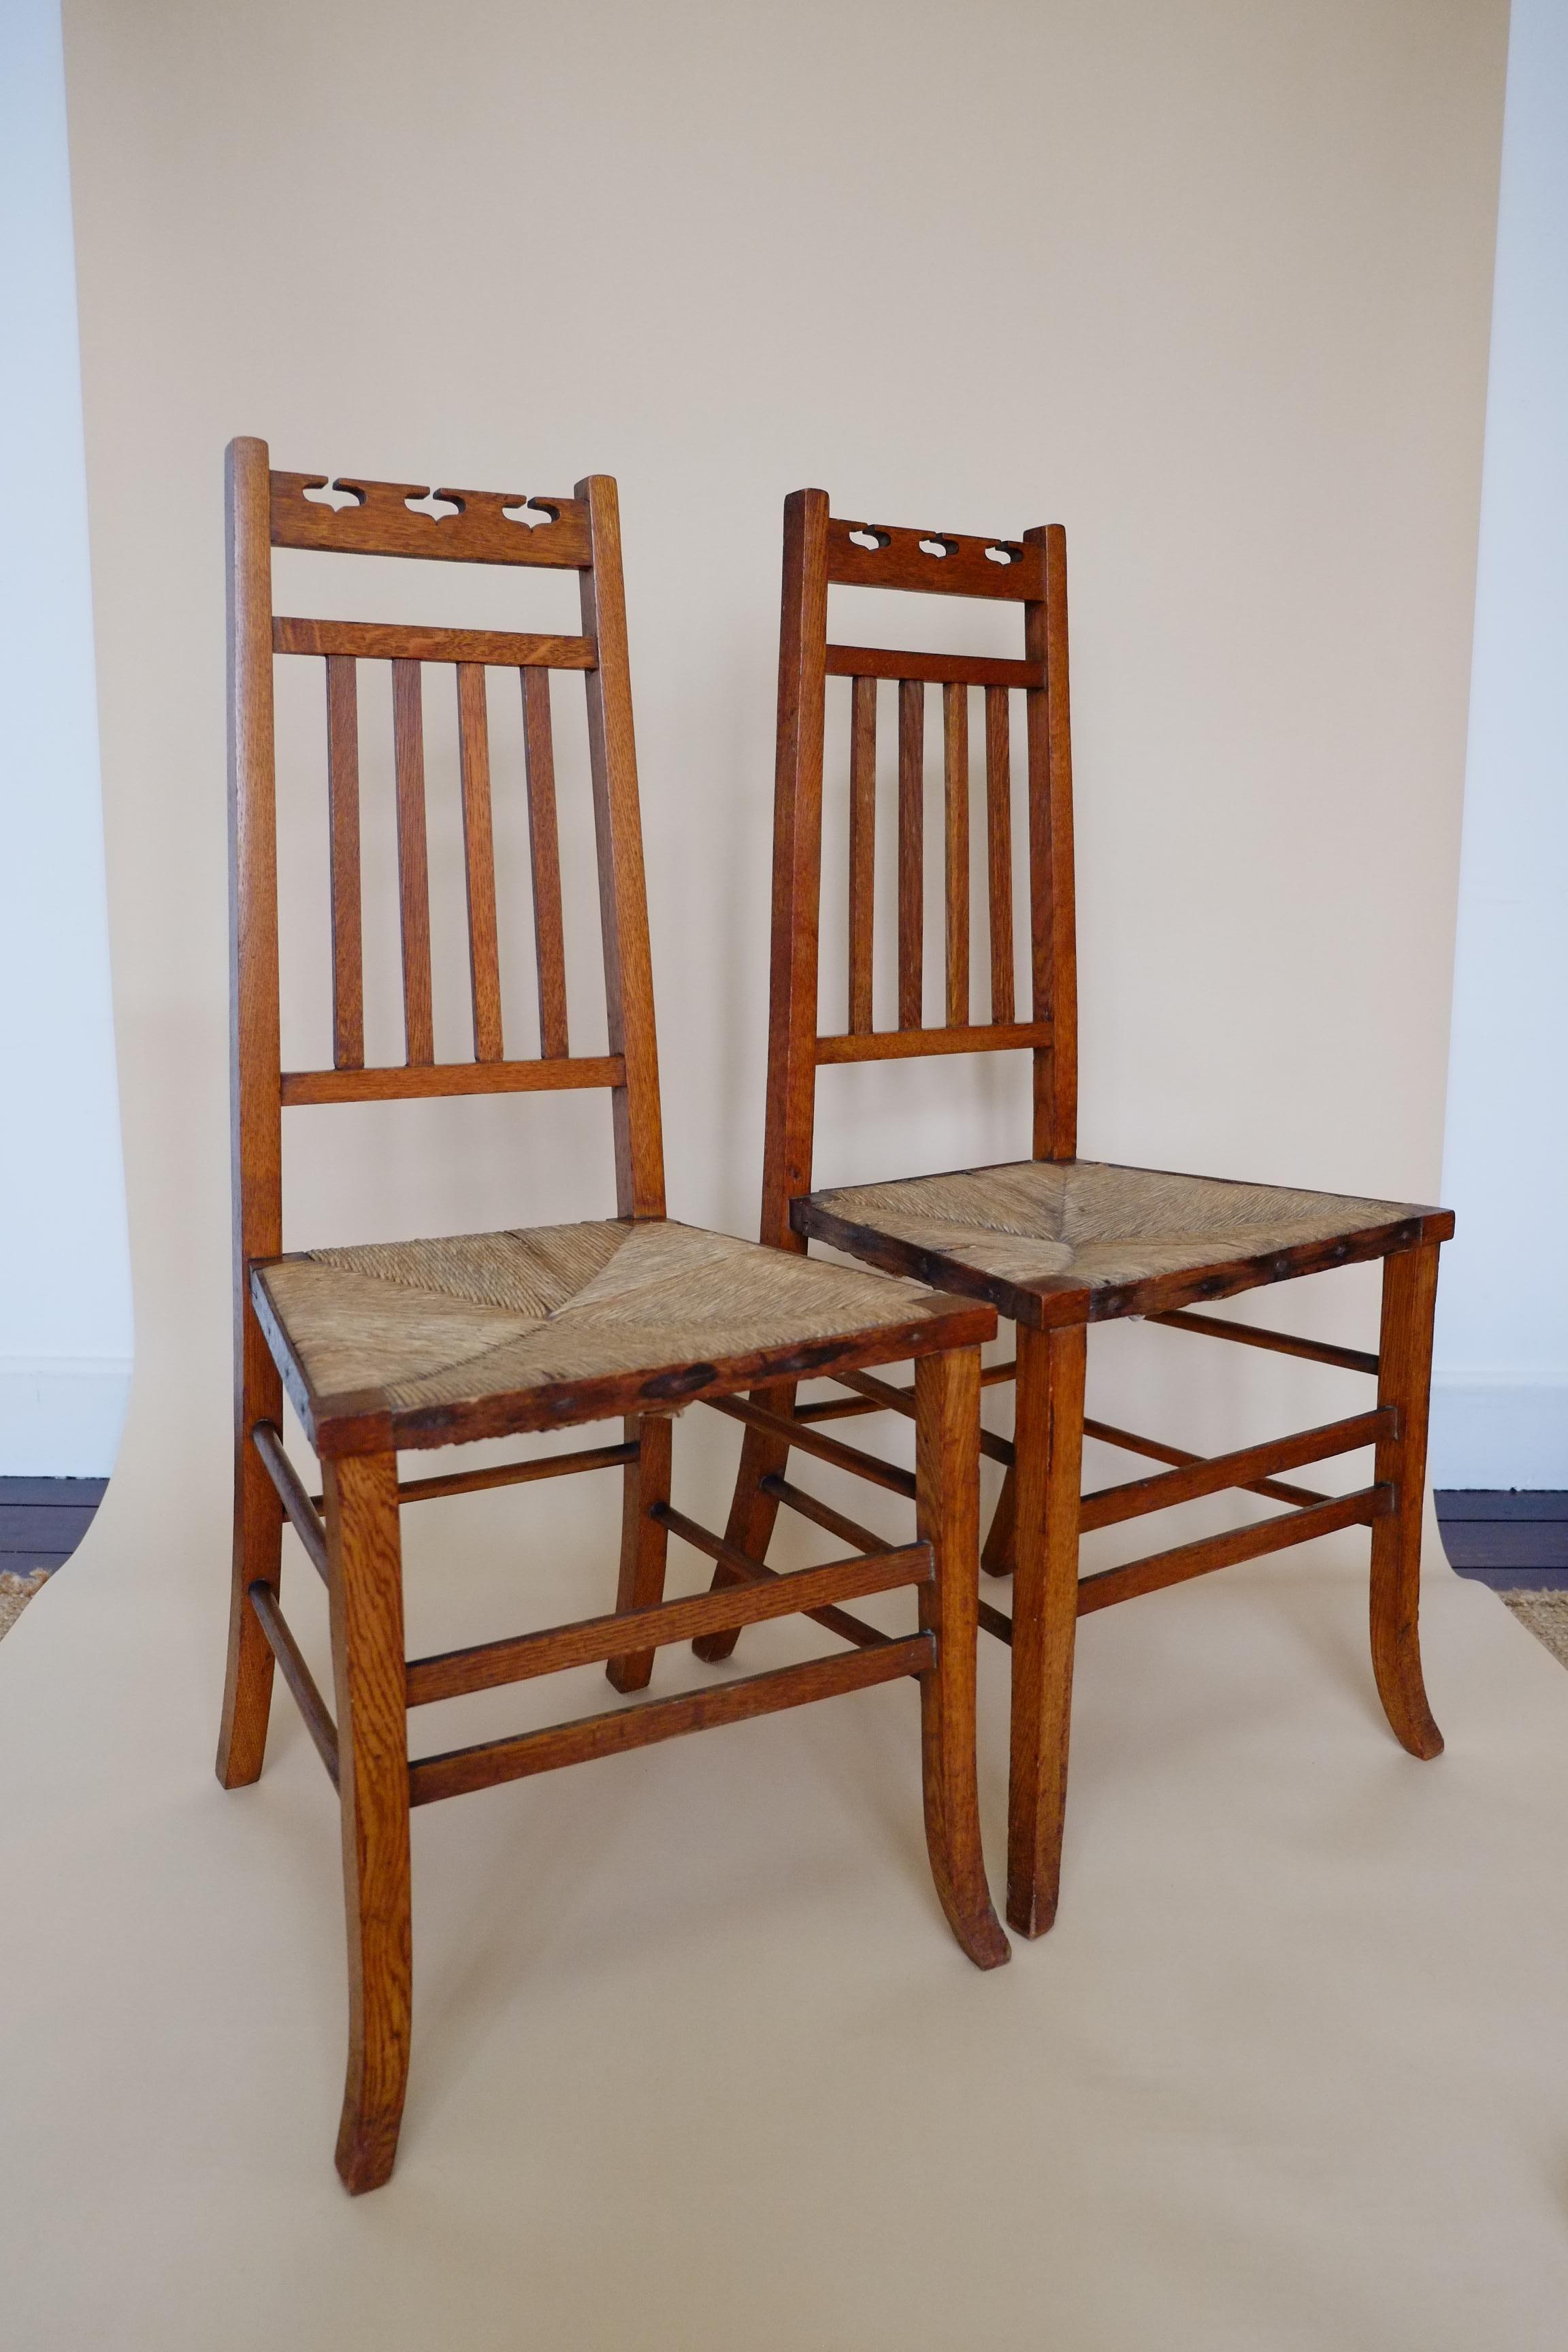 A stunning pair of Arts & Crafts side chairs from the early 1900s. Attributed to E A Taylor for Wylie & Lockhead. Made in Scotland. The chairs have the most elegant structure, with slim tapering back rests, angular squared seat and softly splayed